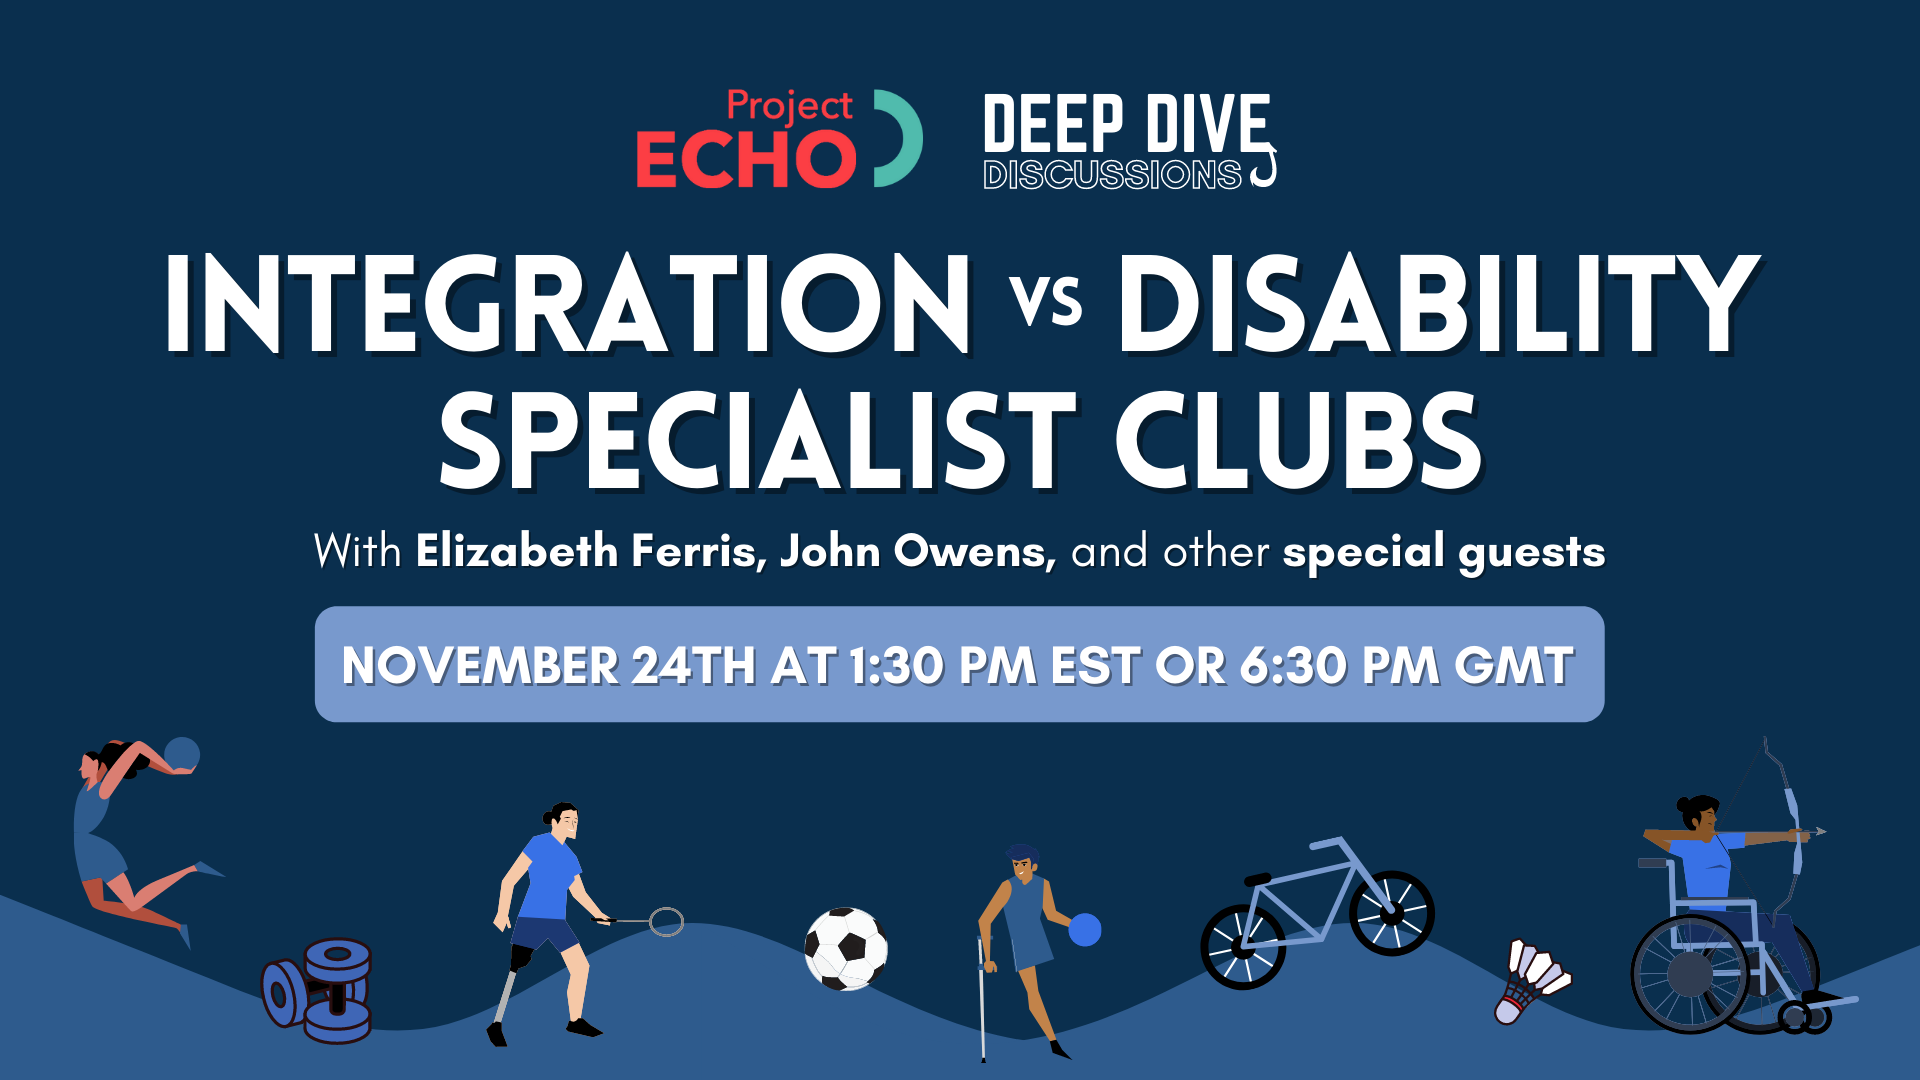 Image of text reading "Project Echo Deep Dive Discussions: Integration versus Disability Specialist Clubs with Elizabeth Ferris, John Owens and other special guests. November 24th at 1:30 PM EST or 6:30 PM GST."